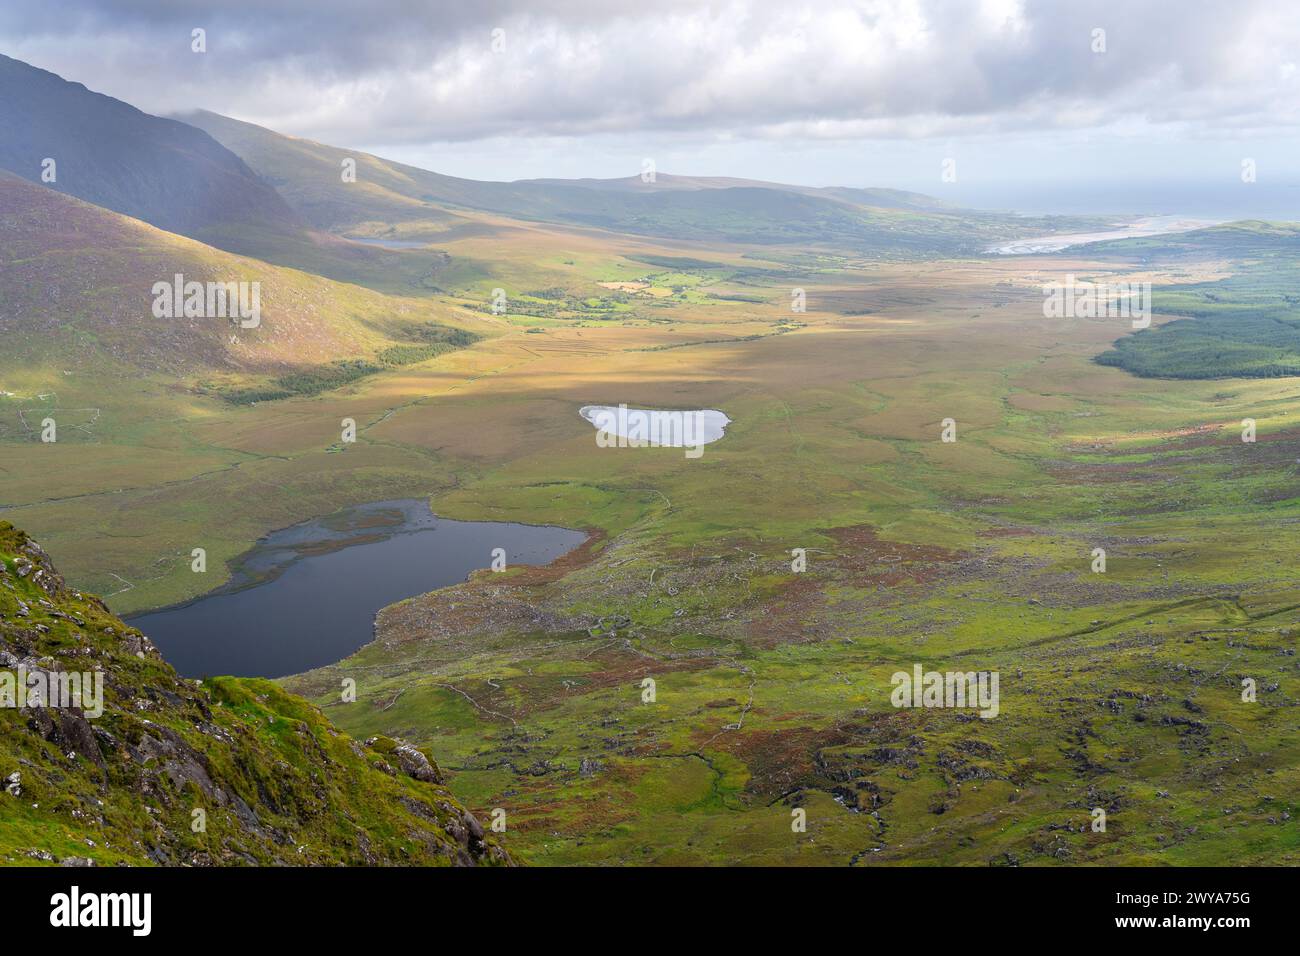 View from the Conor pass, County Kerry, Ireland. Stock Photo